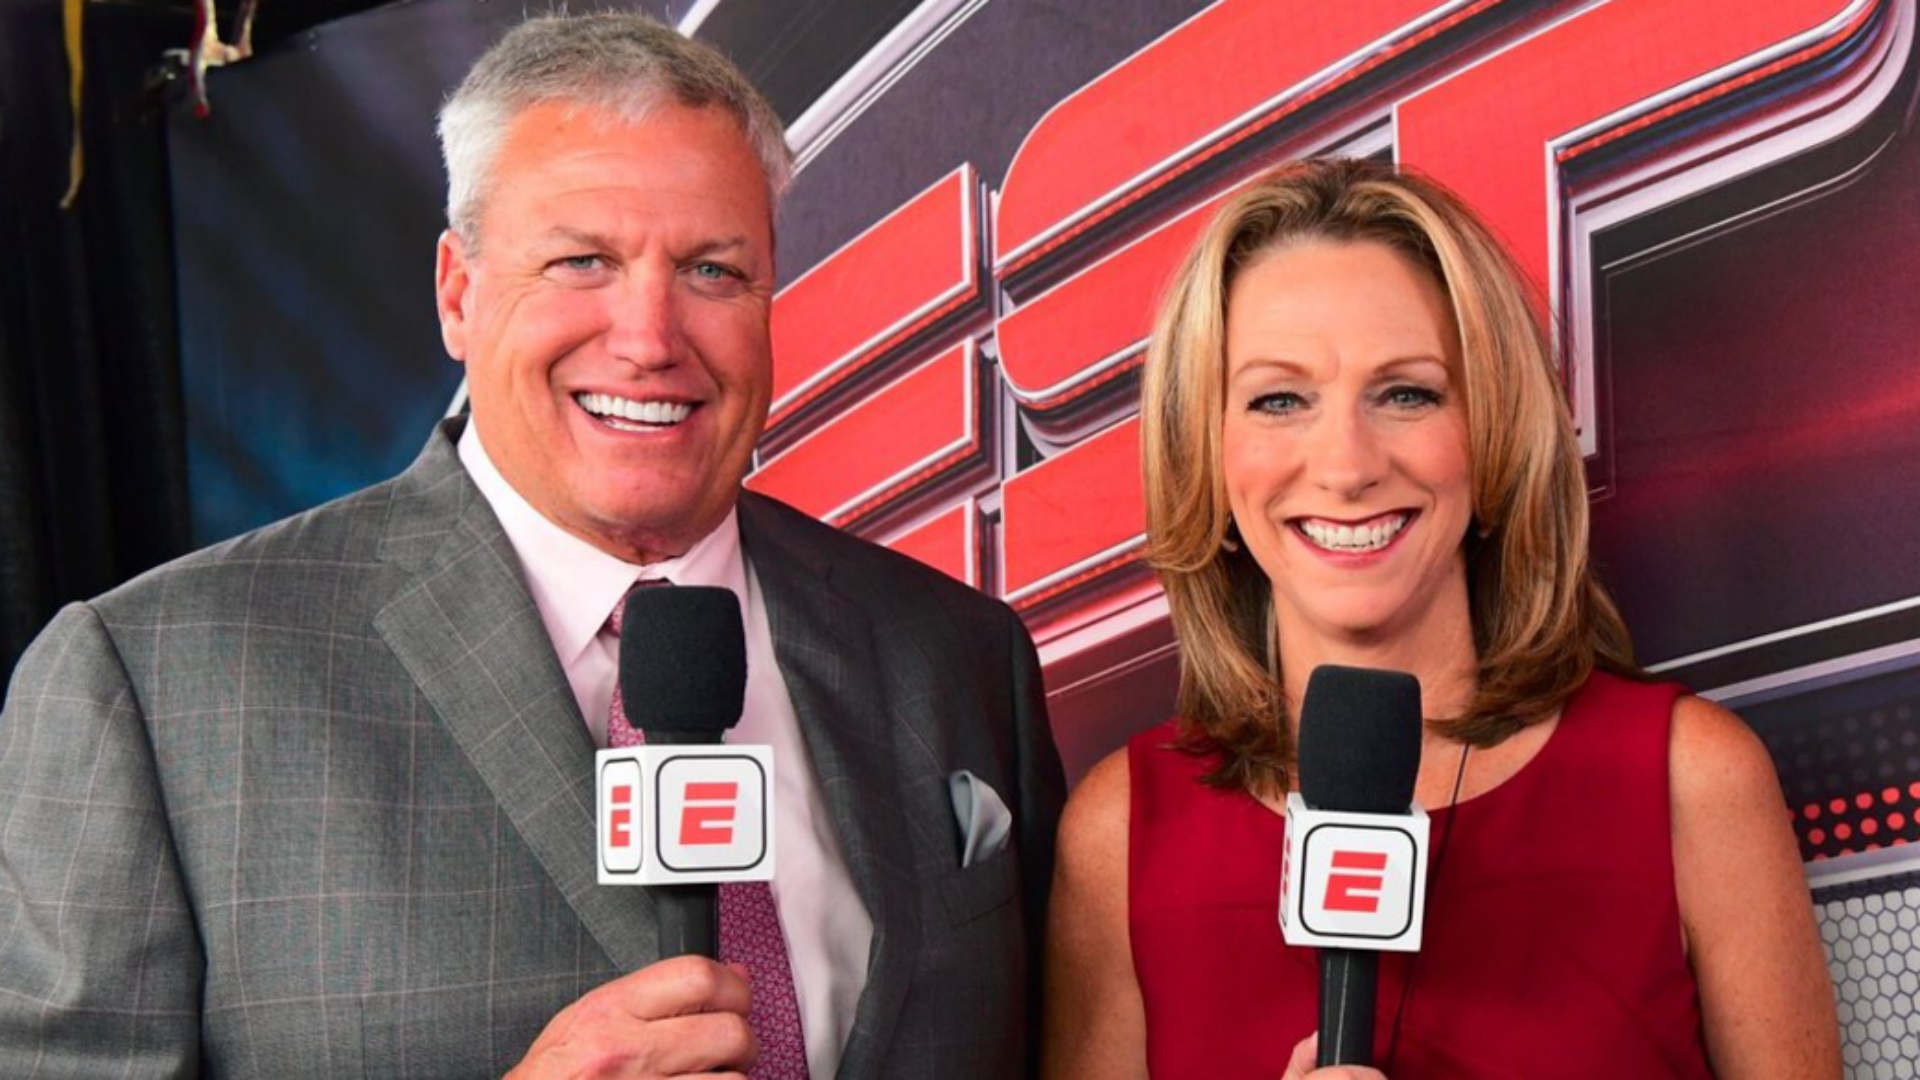 Beth Mowins becomes the first woman to call an NFL game in 30 years